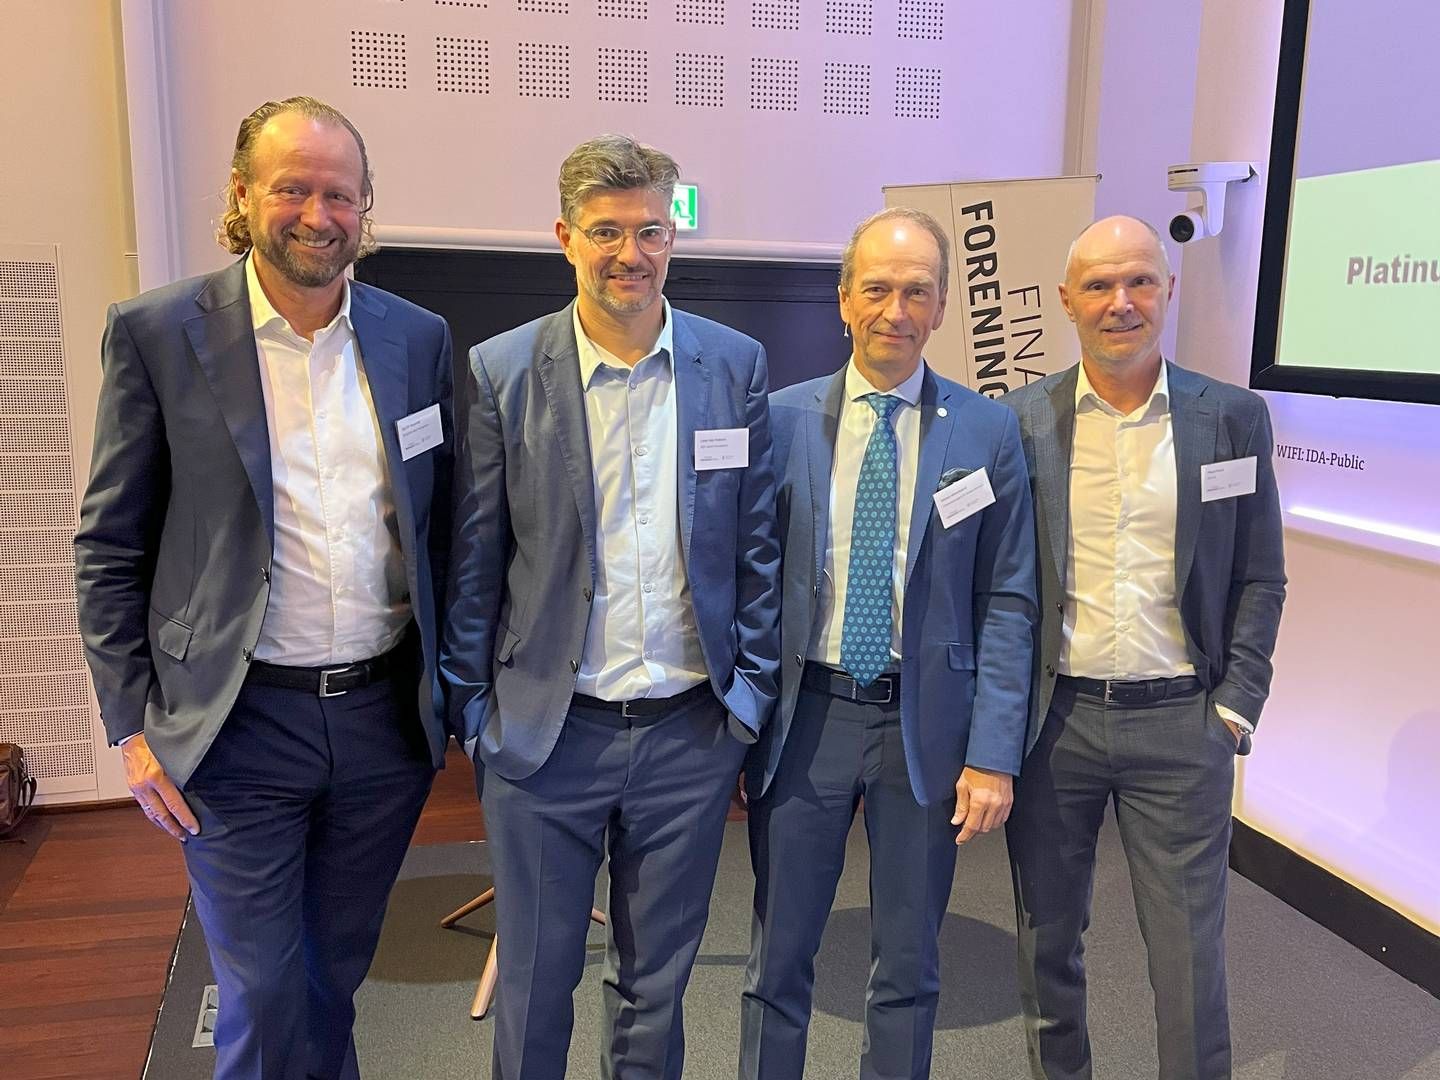 The speakers on AI and Big Data at the Nordic Investment Conference. From left: CEO of Storebrand Asset Management, Jan Erik Saugestad, Finance professor at CBS and partner at AQR, Lasse Heje Pedersen, CEO of CFA Society Denmark, Michael Albrechtslund and CEO of 2021.ai, Michael Munck. | Photo: CFA Society Denmark